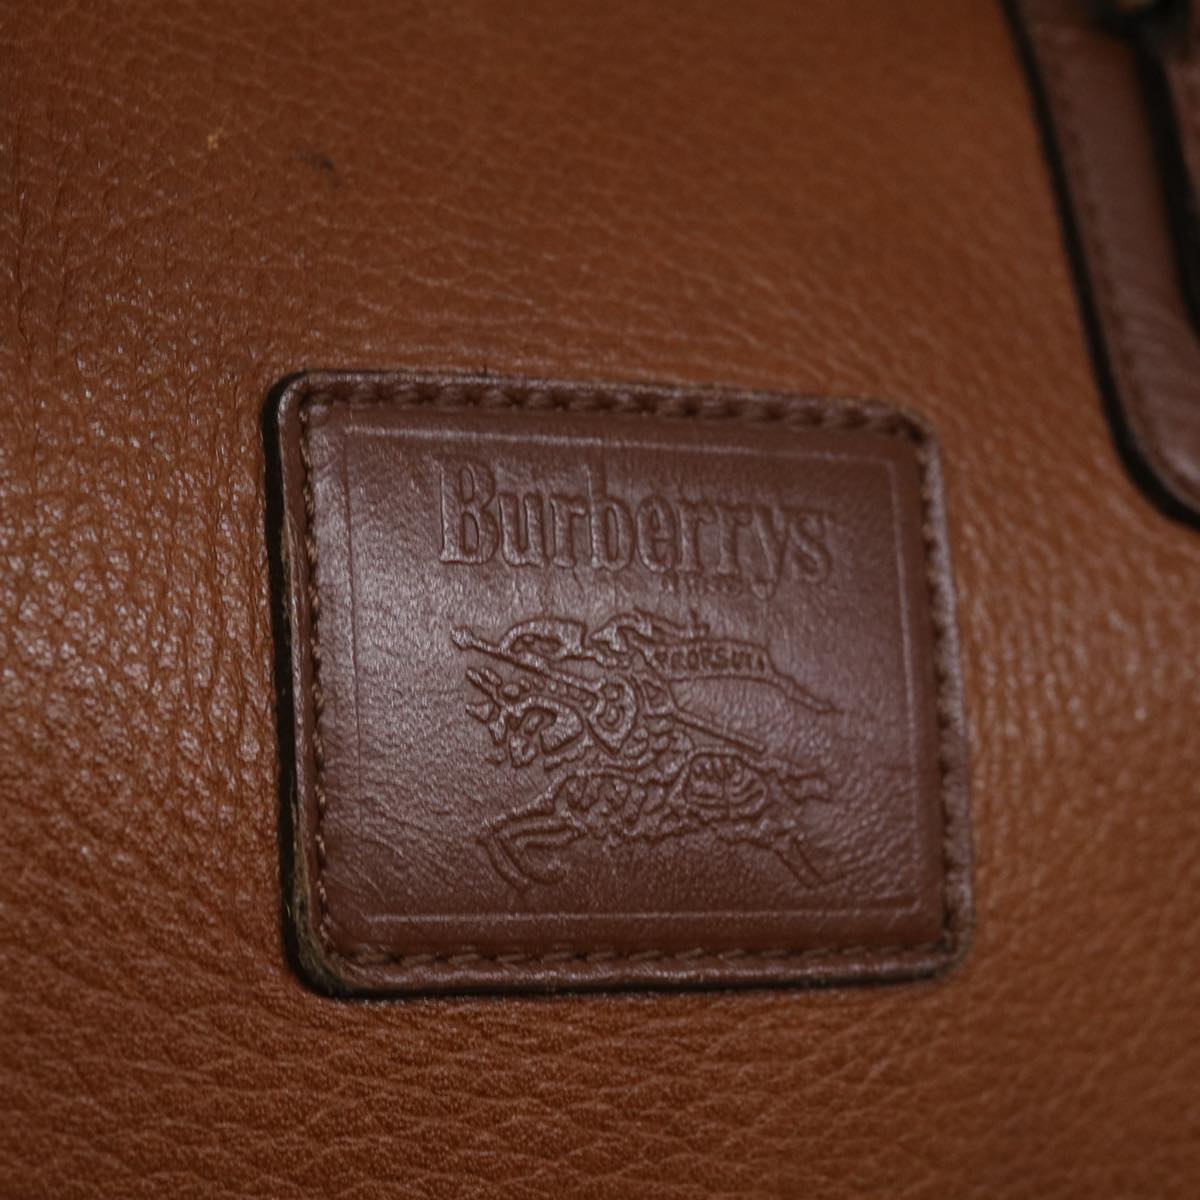 Burberrys Boston Bag Leather Brown Auth hk1146